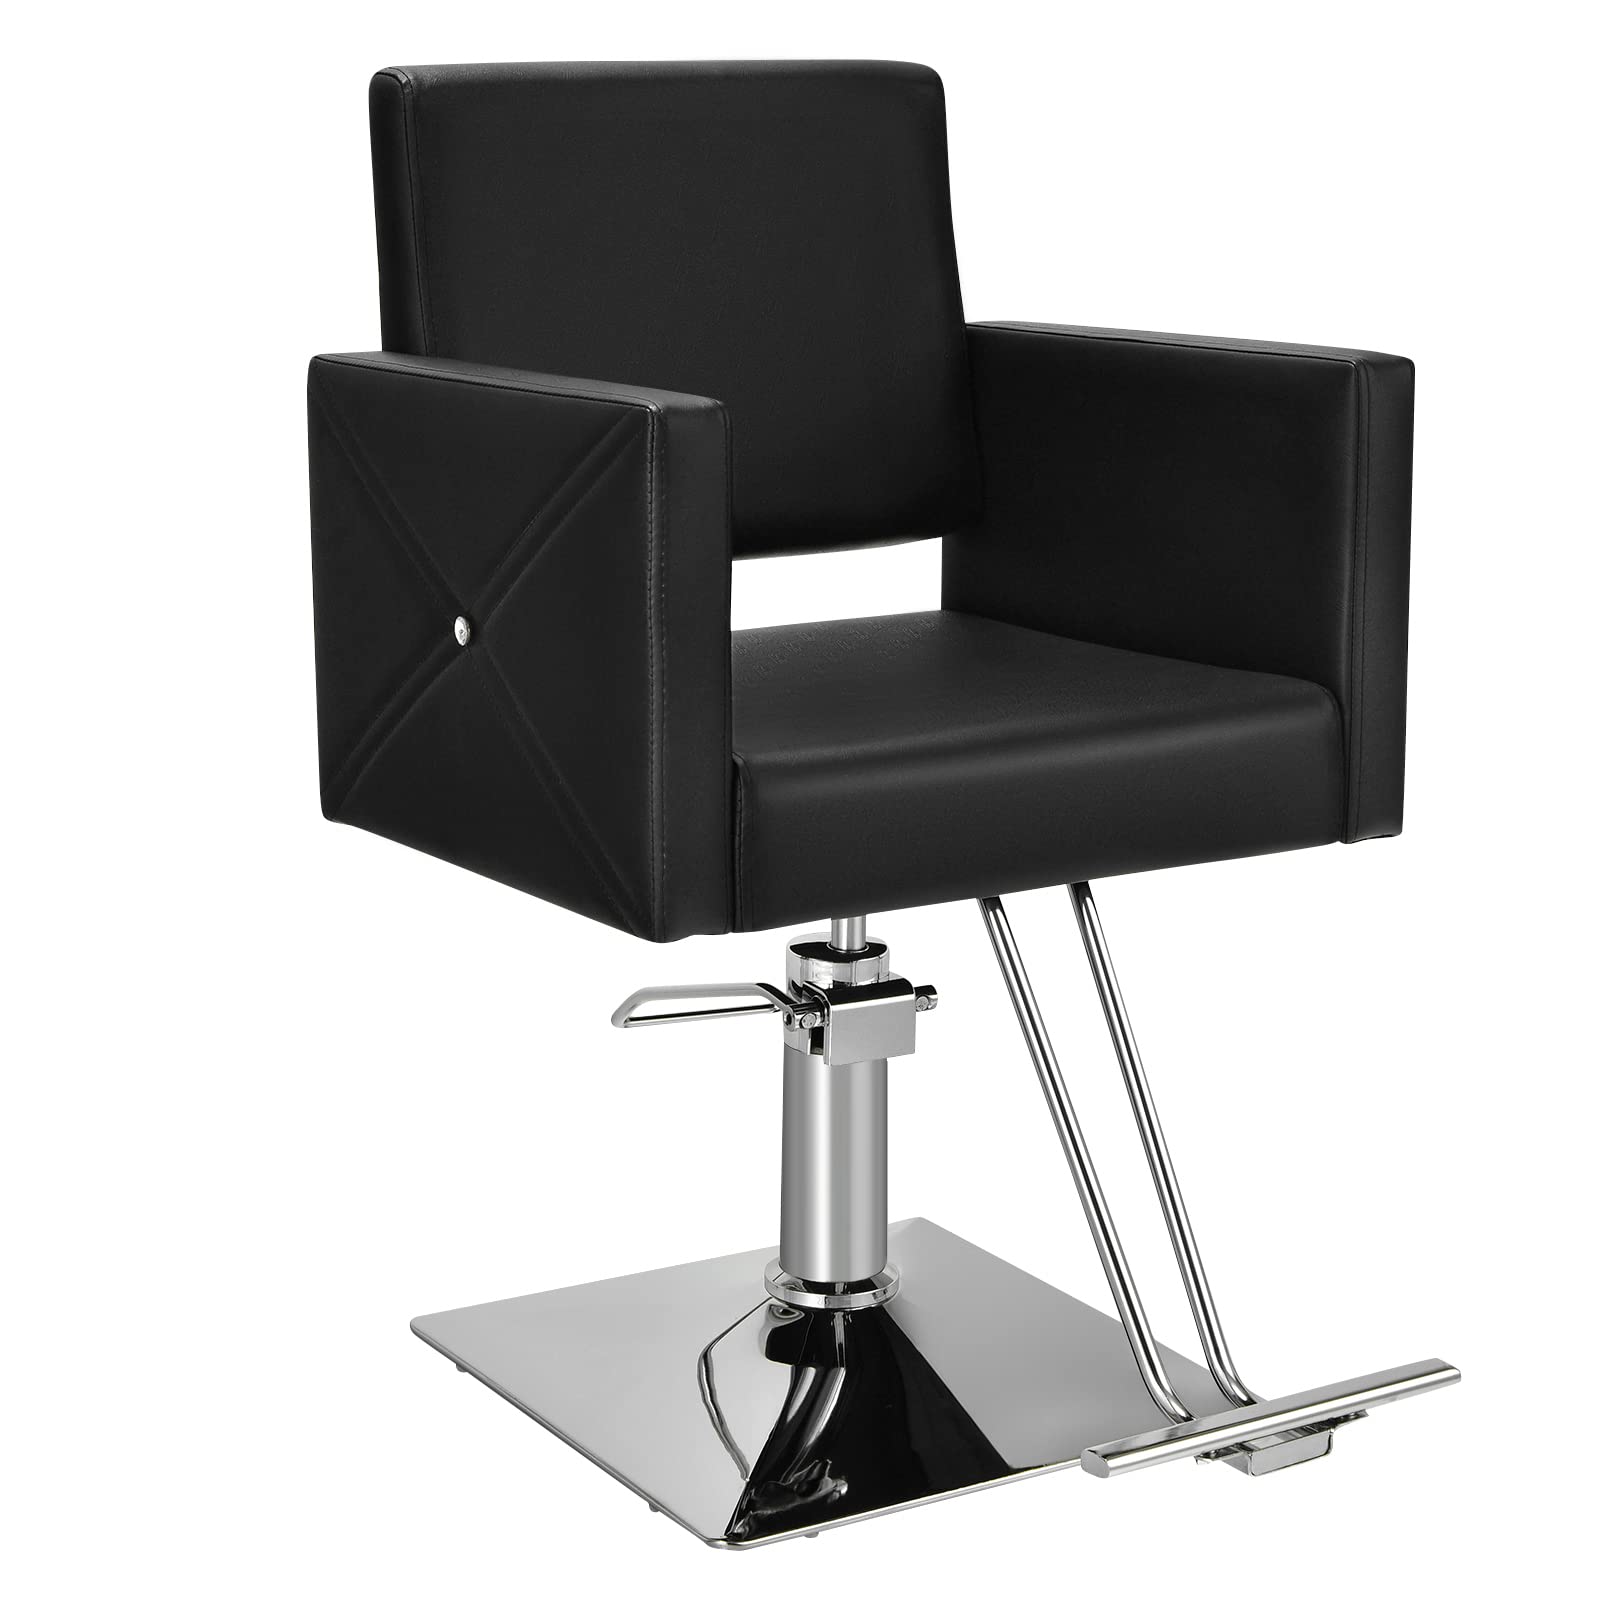 Makeup Hair Salon Chairs for Hair Stylist, Load up 330 LBS